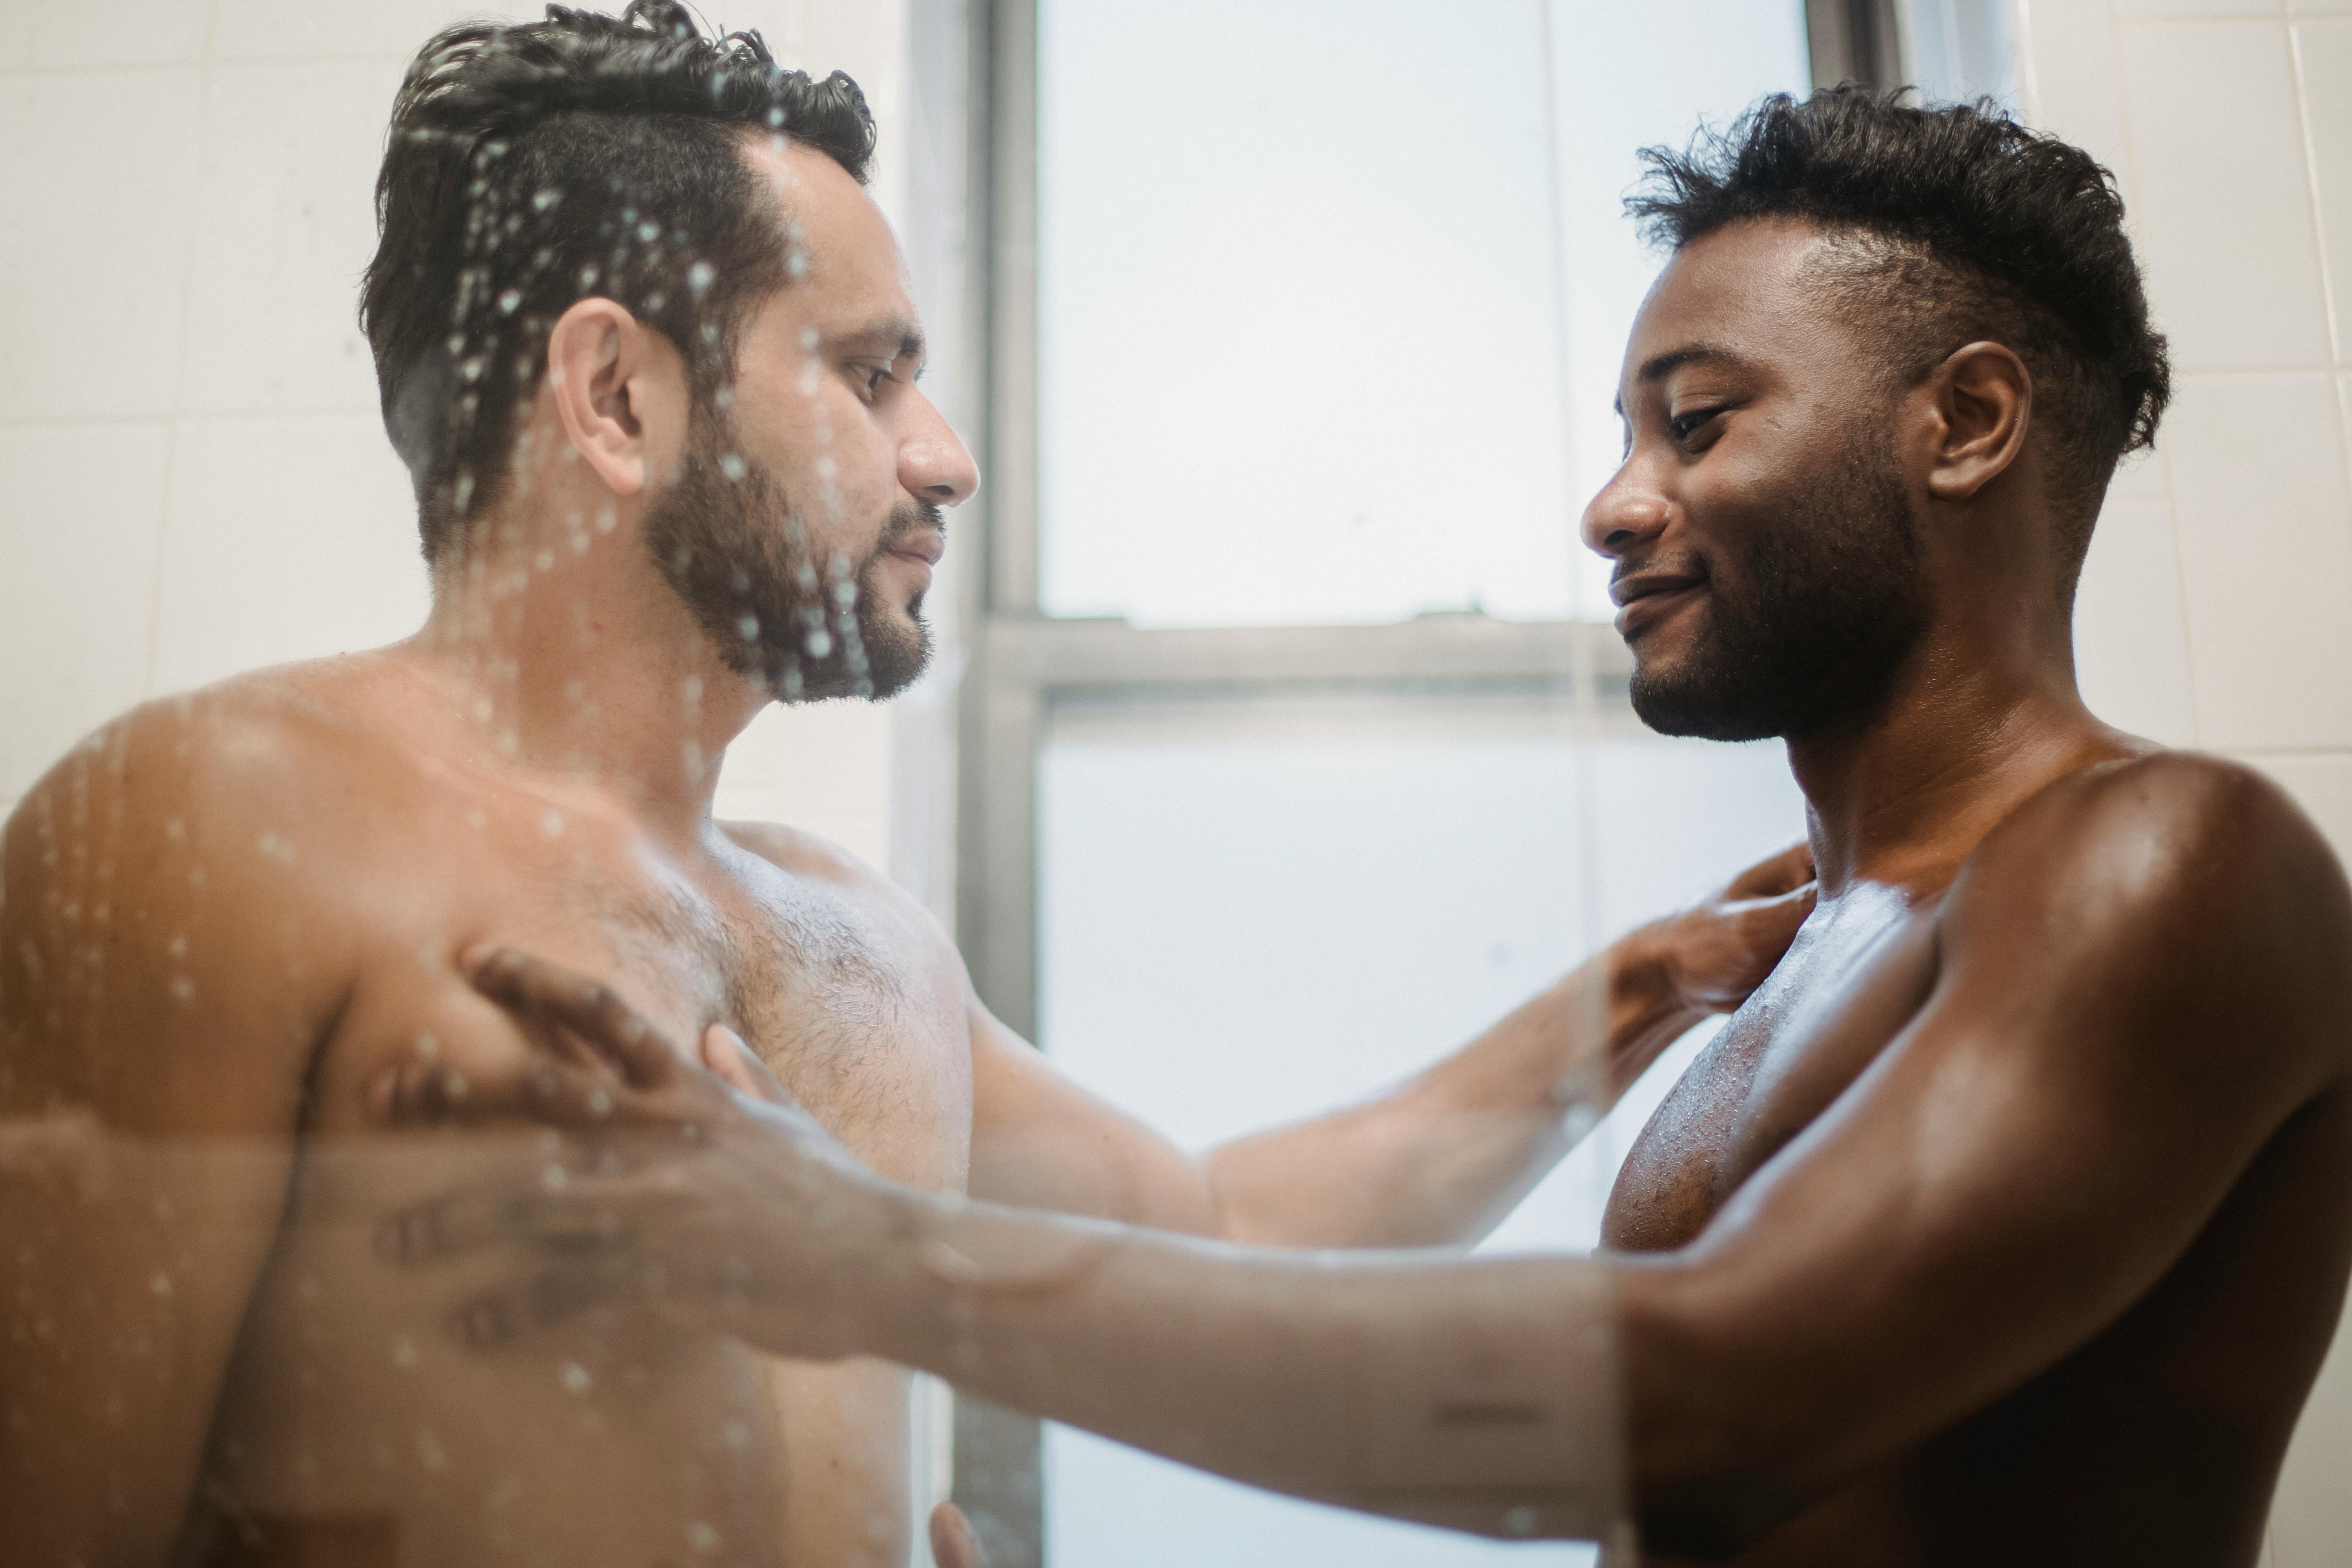 photo of men taking a bath together